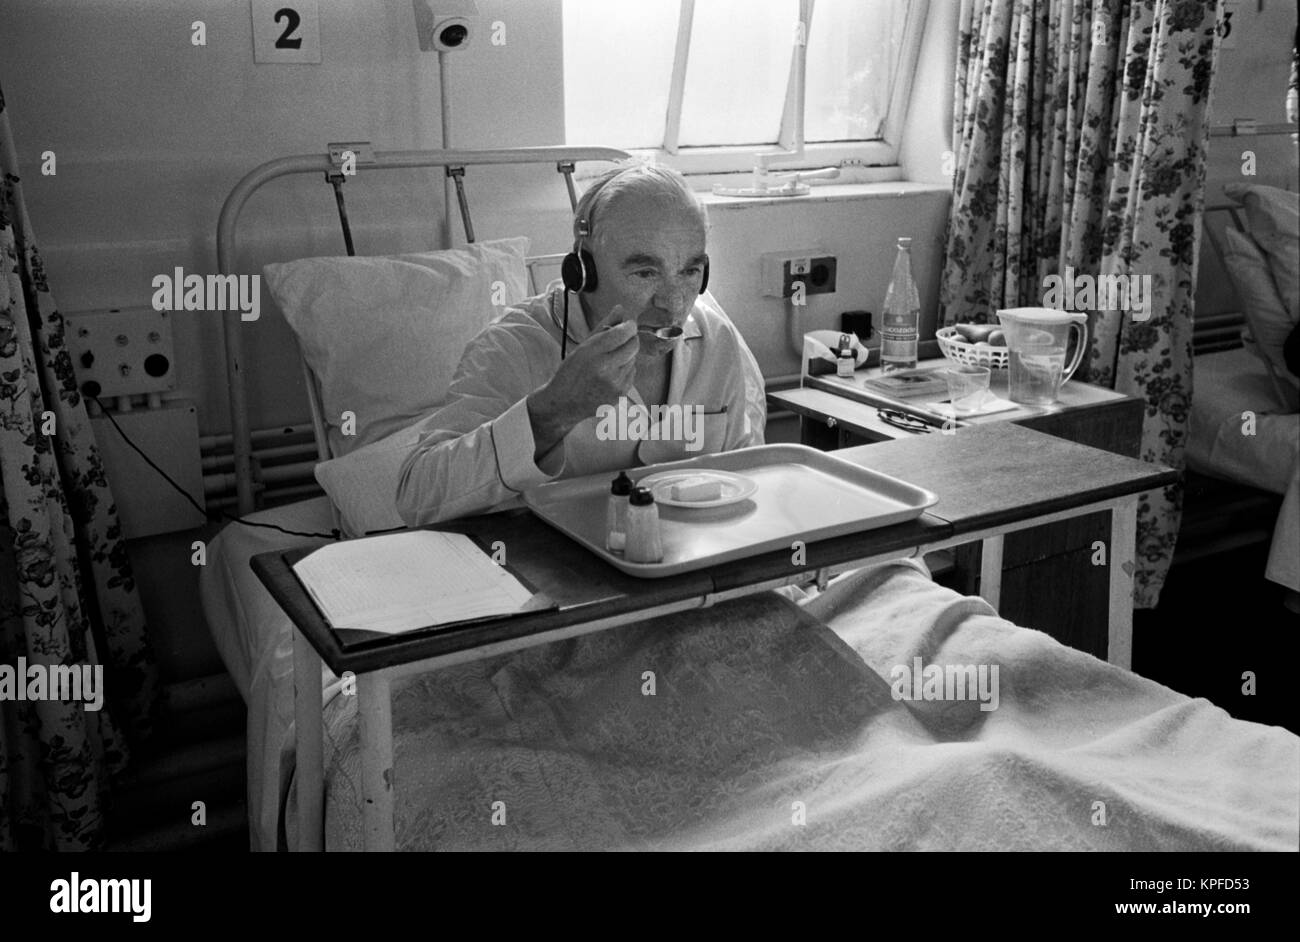 The 1970s National Health Service (NHS) Charing Cross Hospital. An older man sitting up in bed eating his lunch. He is listening to the radio and wearing headphones.  Fulham, London, England circa 1972. HOMER SYKES Stock Photo